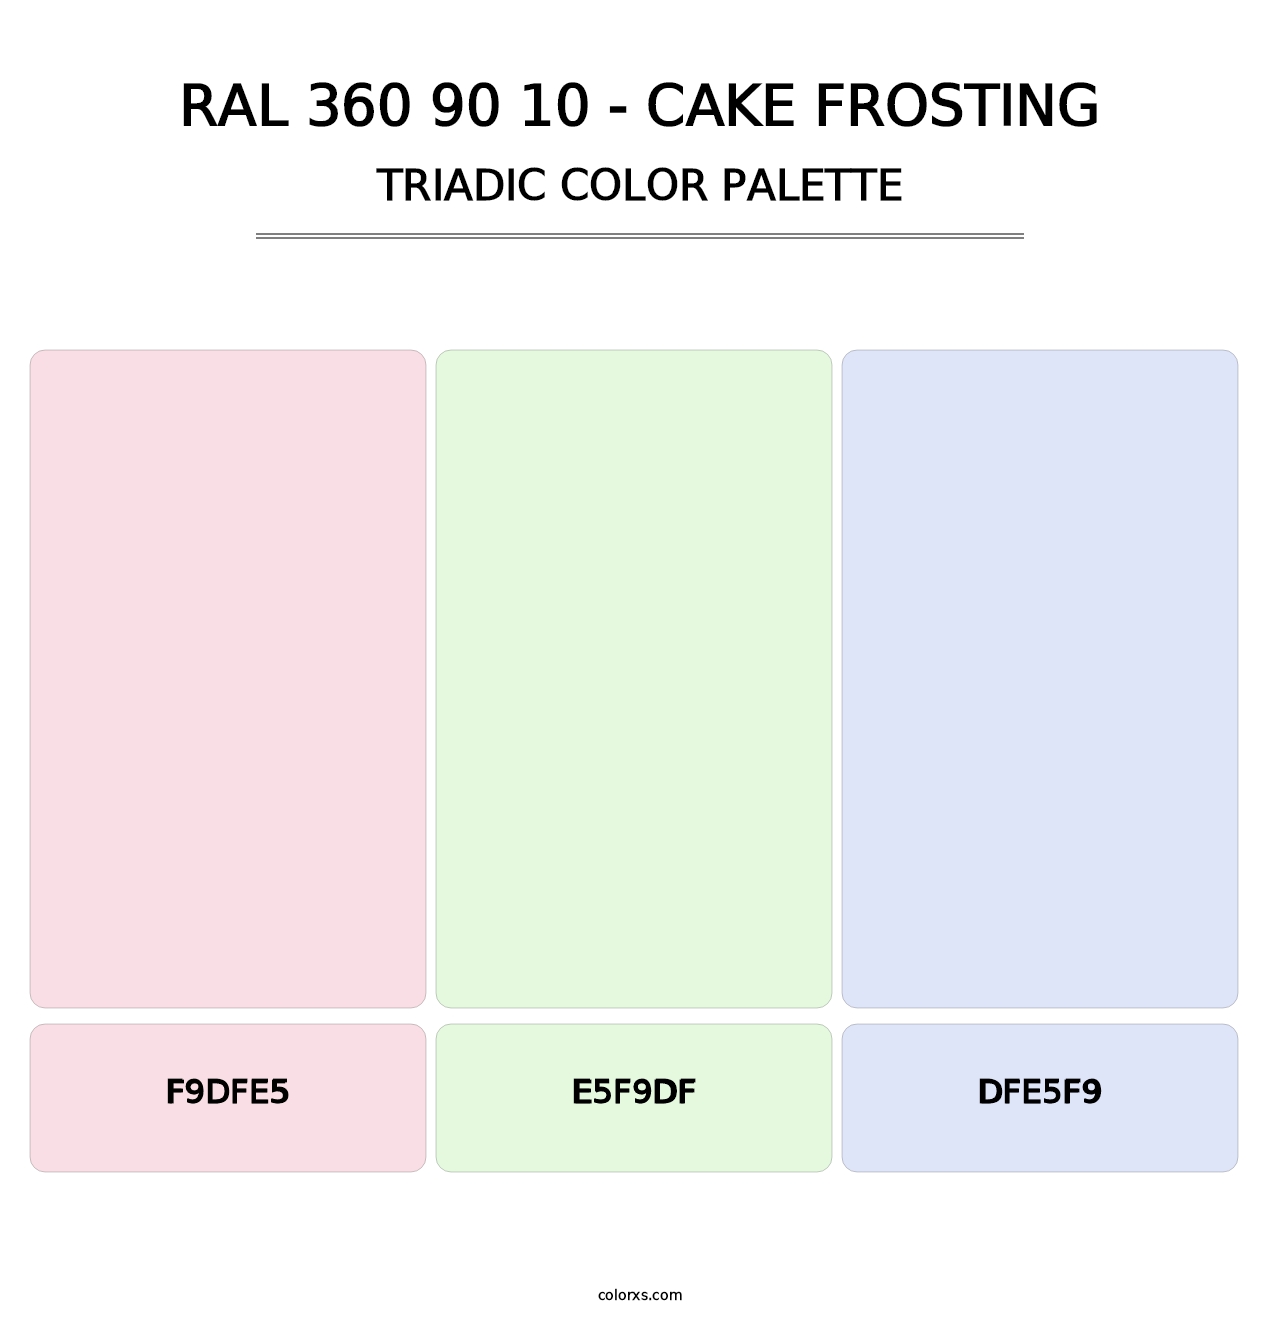 RAL 360 90 10 - Cake Frosting - Triadic Color Palette